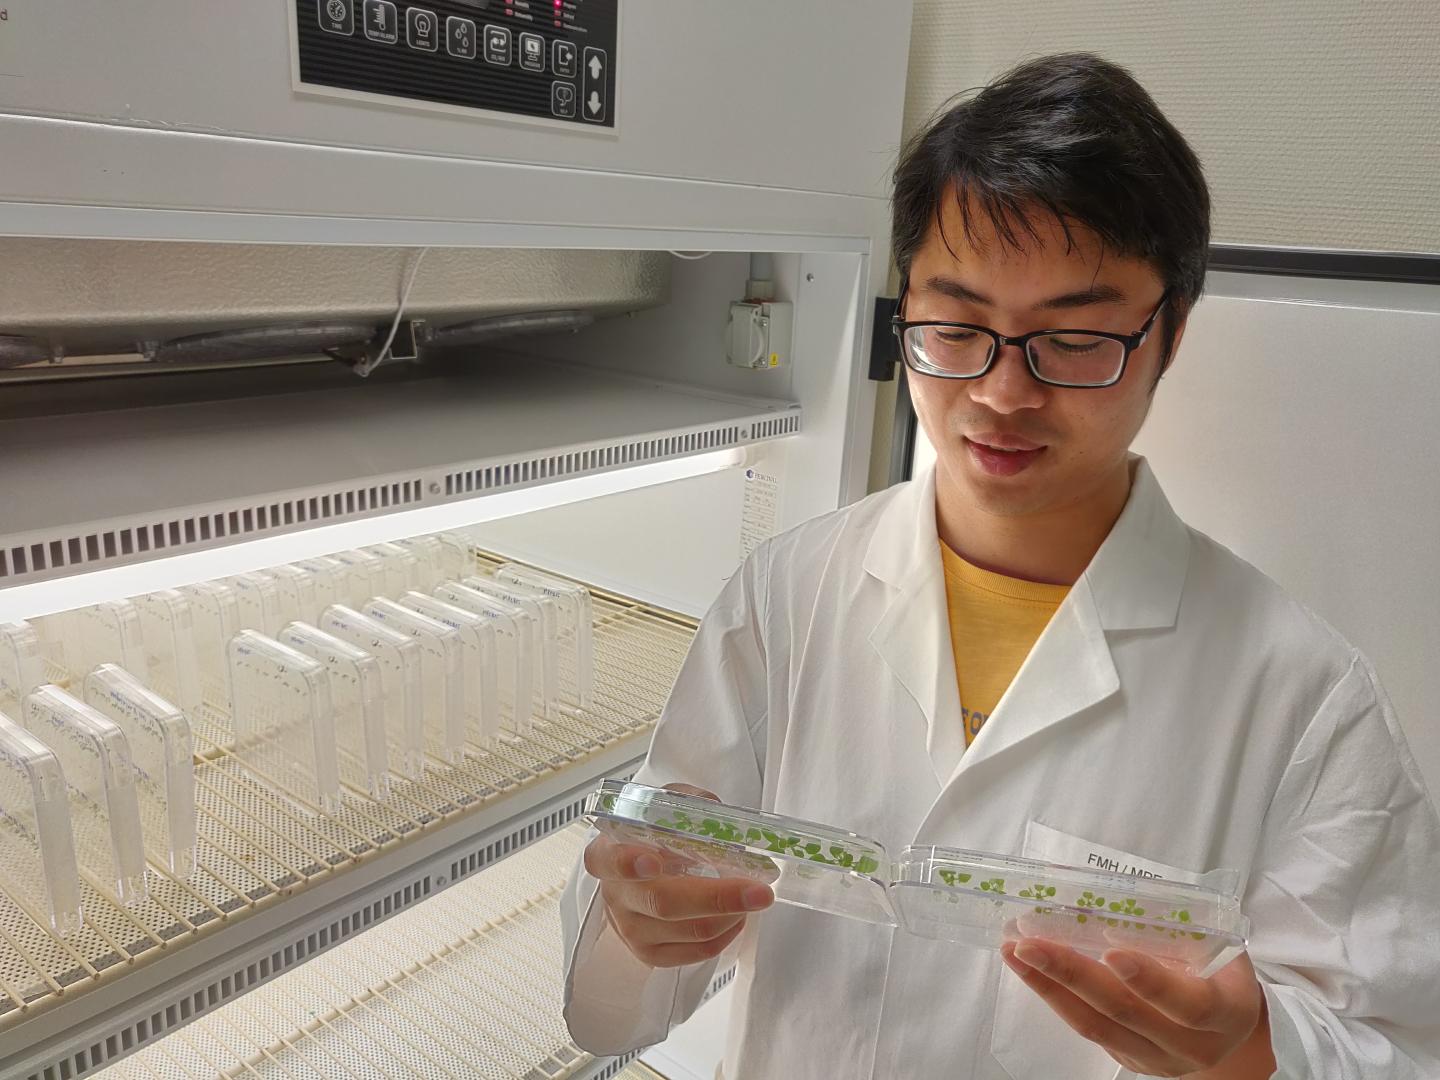 Zhongtao Jia Inspecting the Root Foraging Response of His <I>Arabidopsis</I> Plants